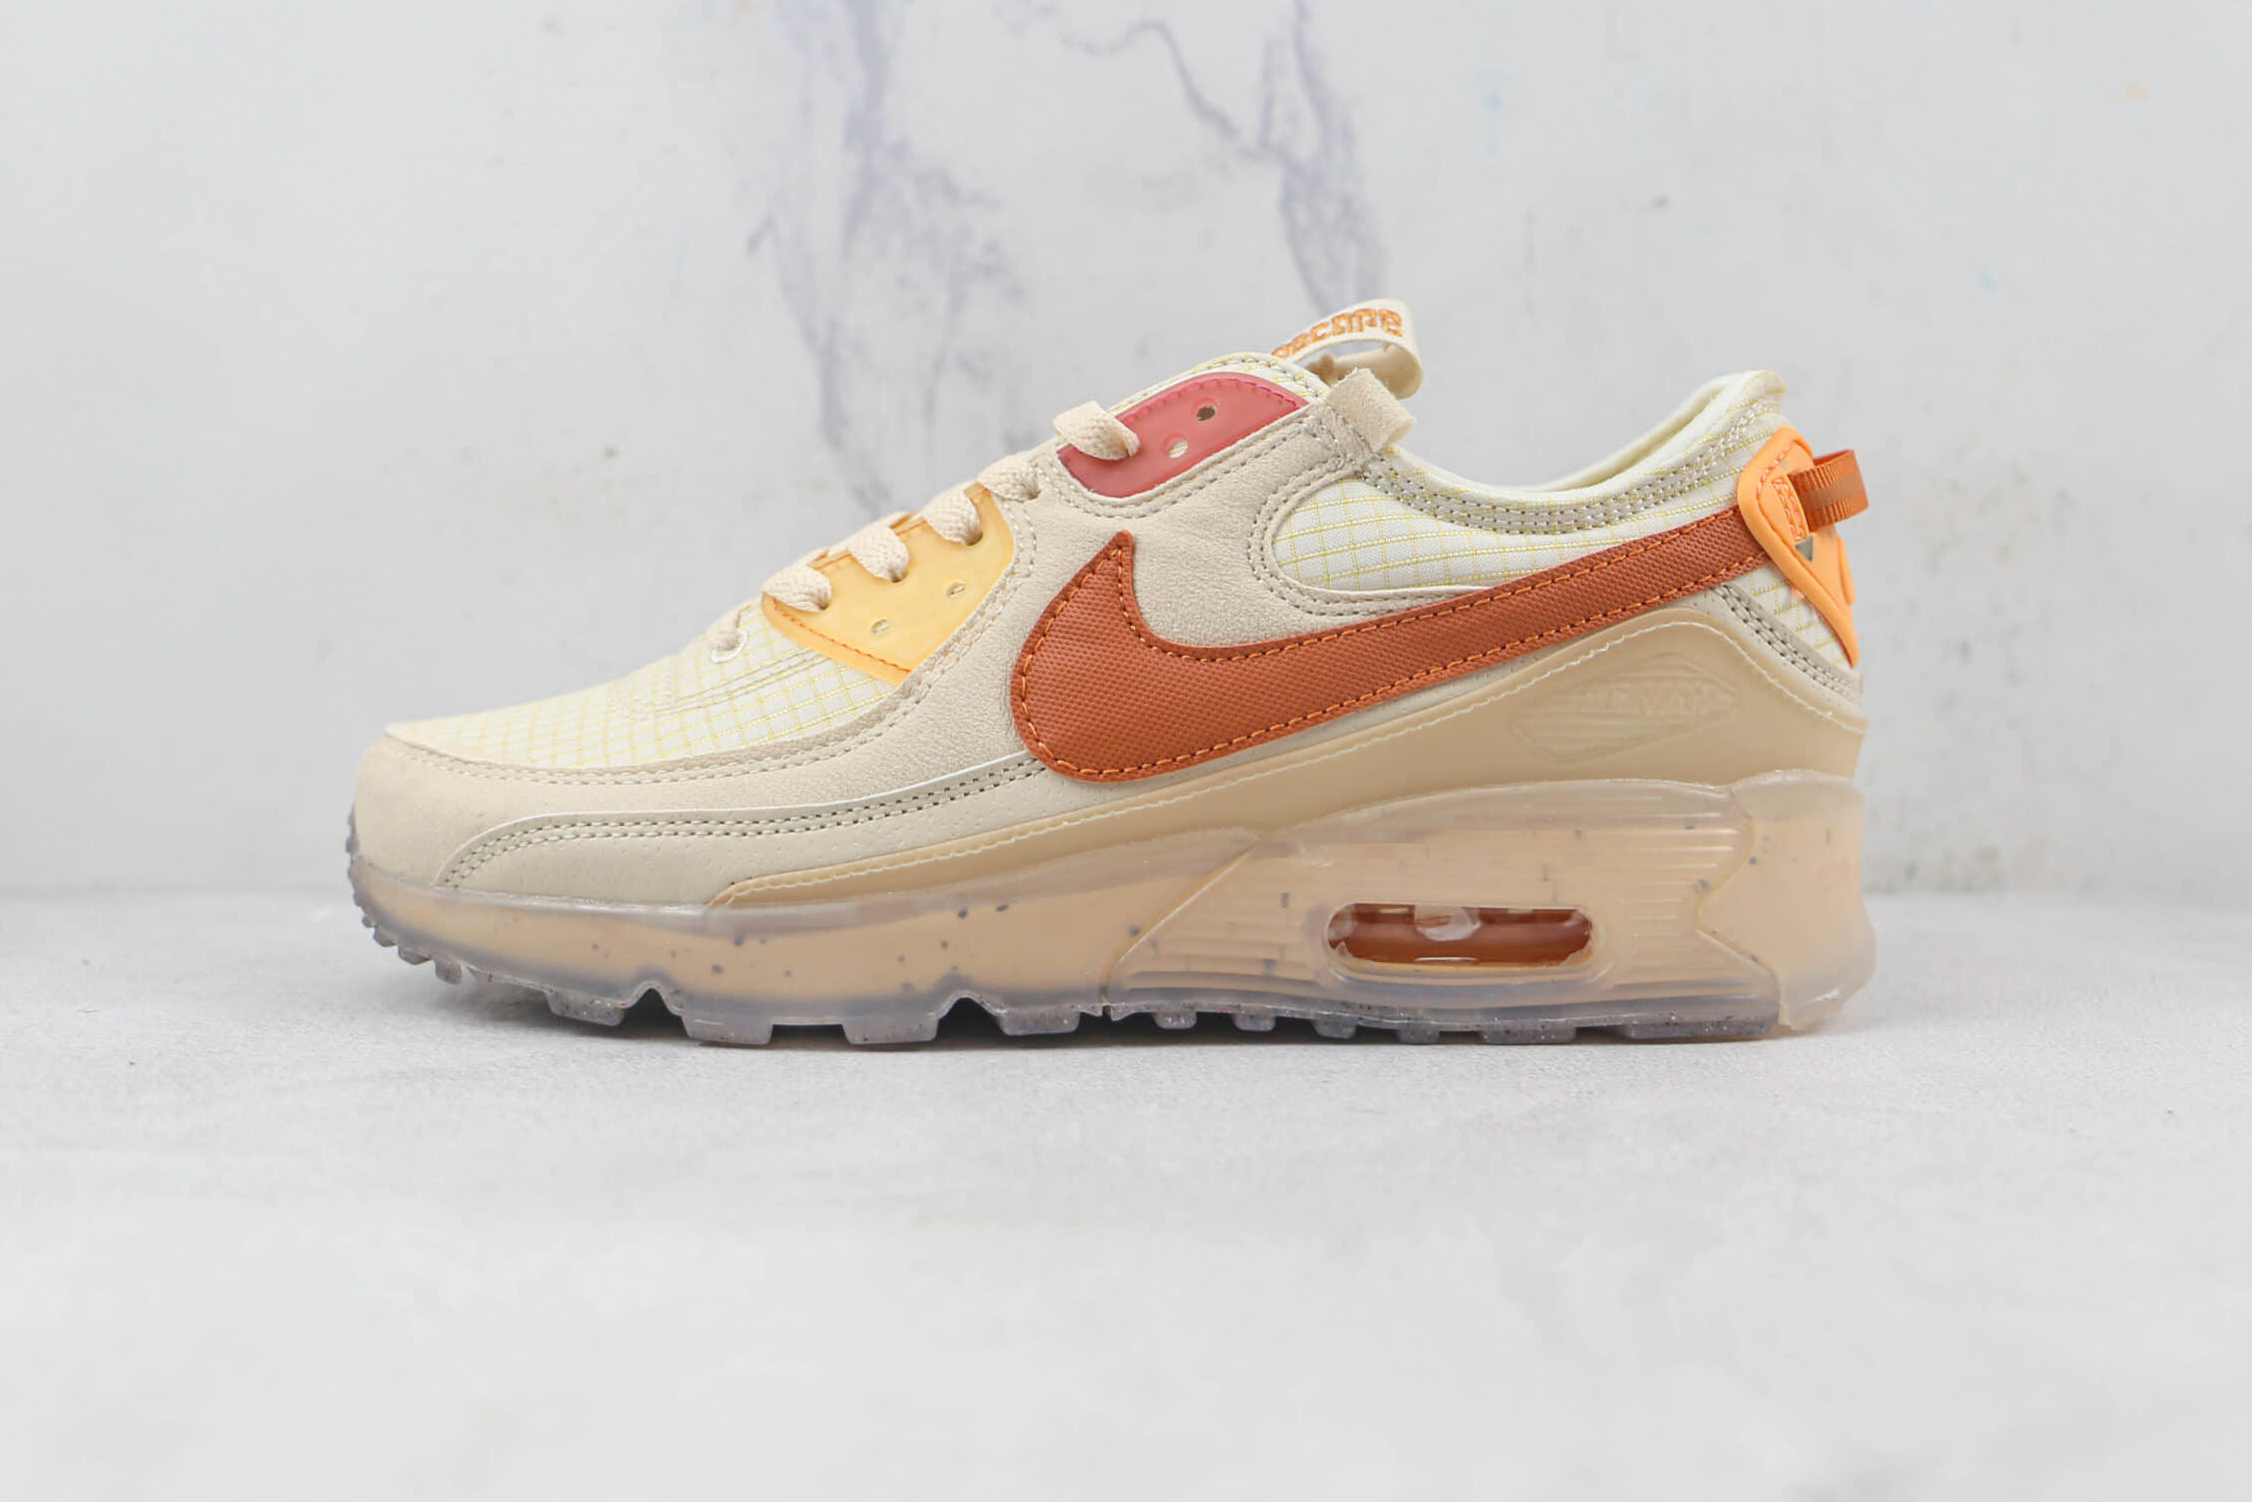 Nike Air Max 90 Terrascape 'Light Bone' DC9450-001 - Stylish Men's Sneakers | Limited Edition Design